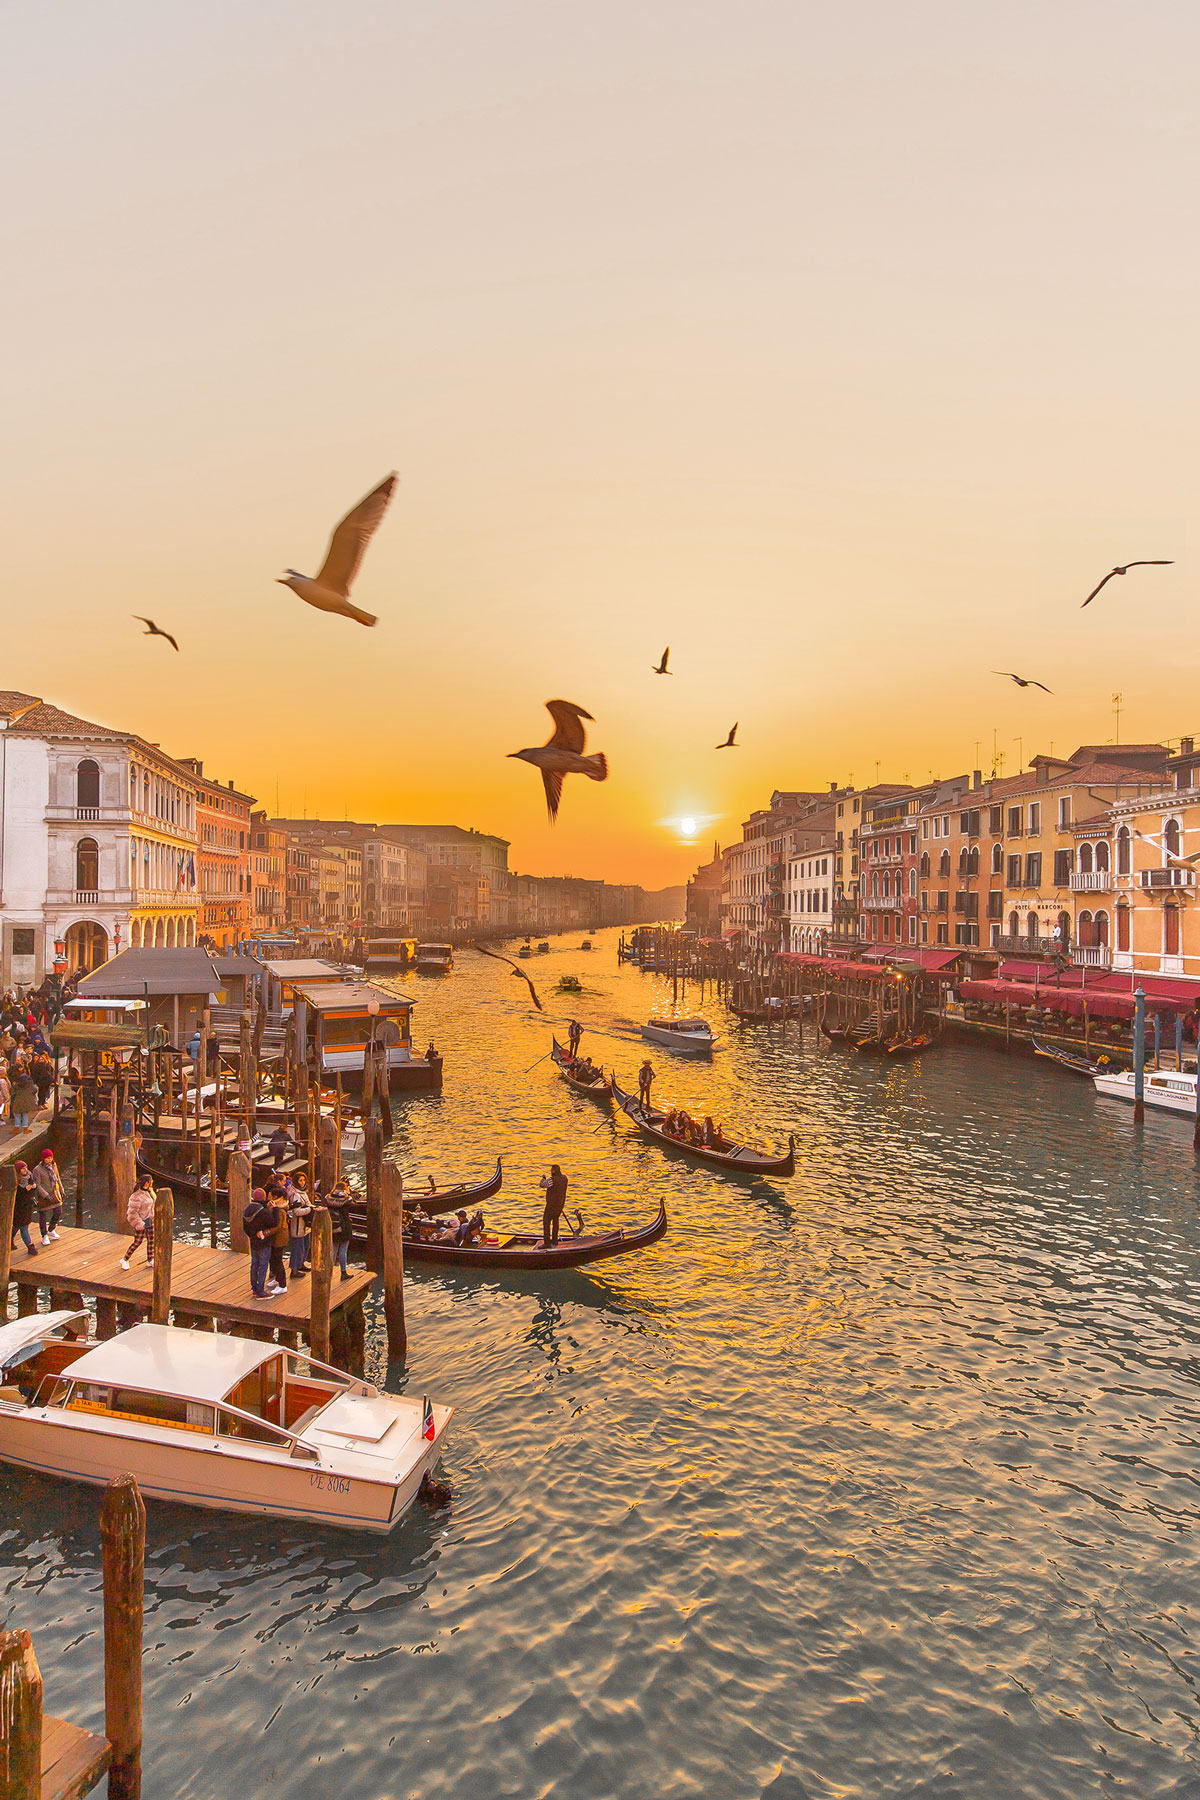 Venice City Guide: The best 10 things to do in Venice